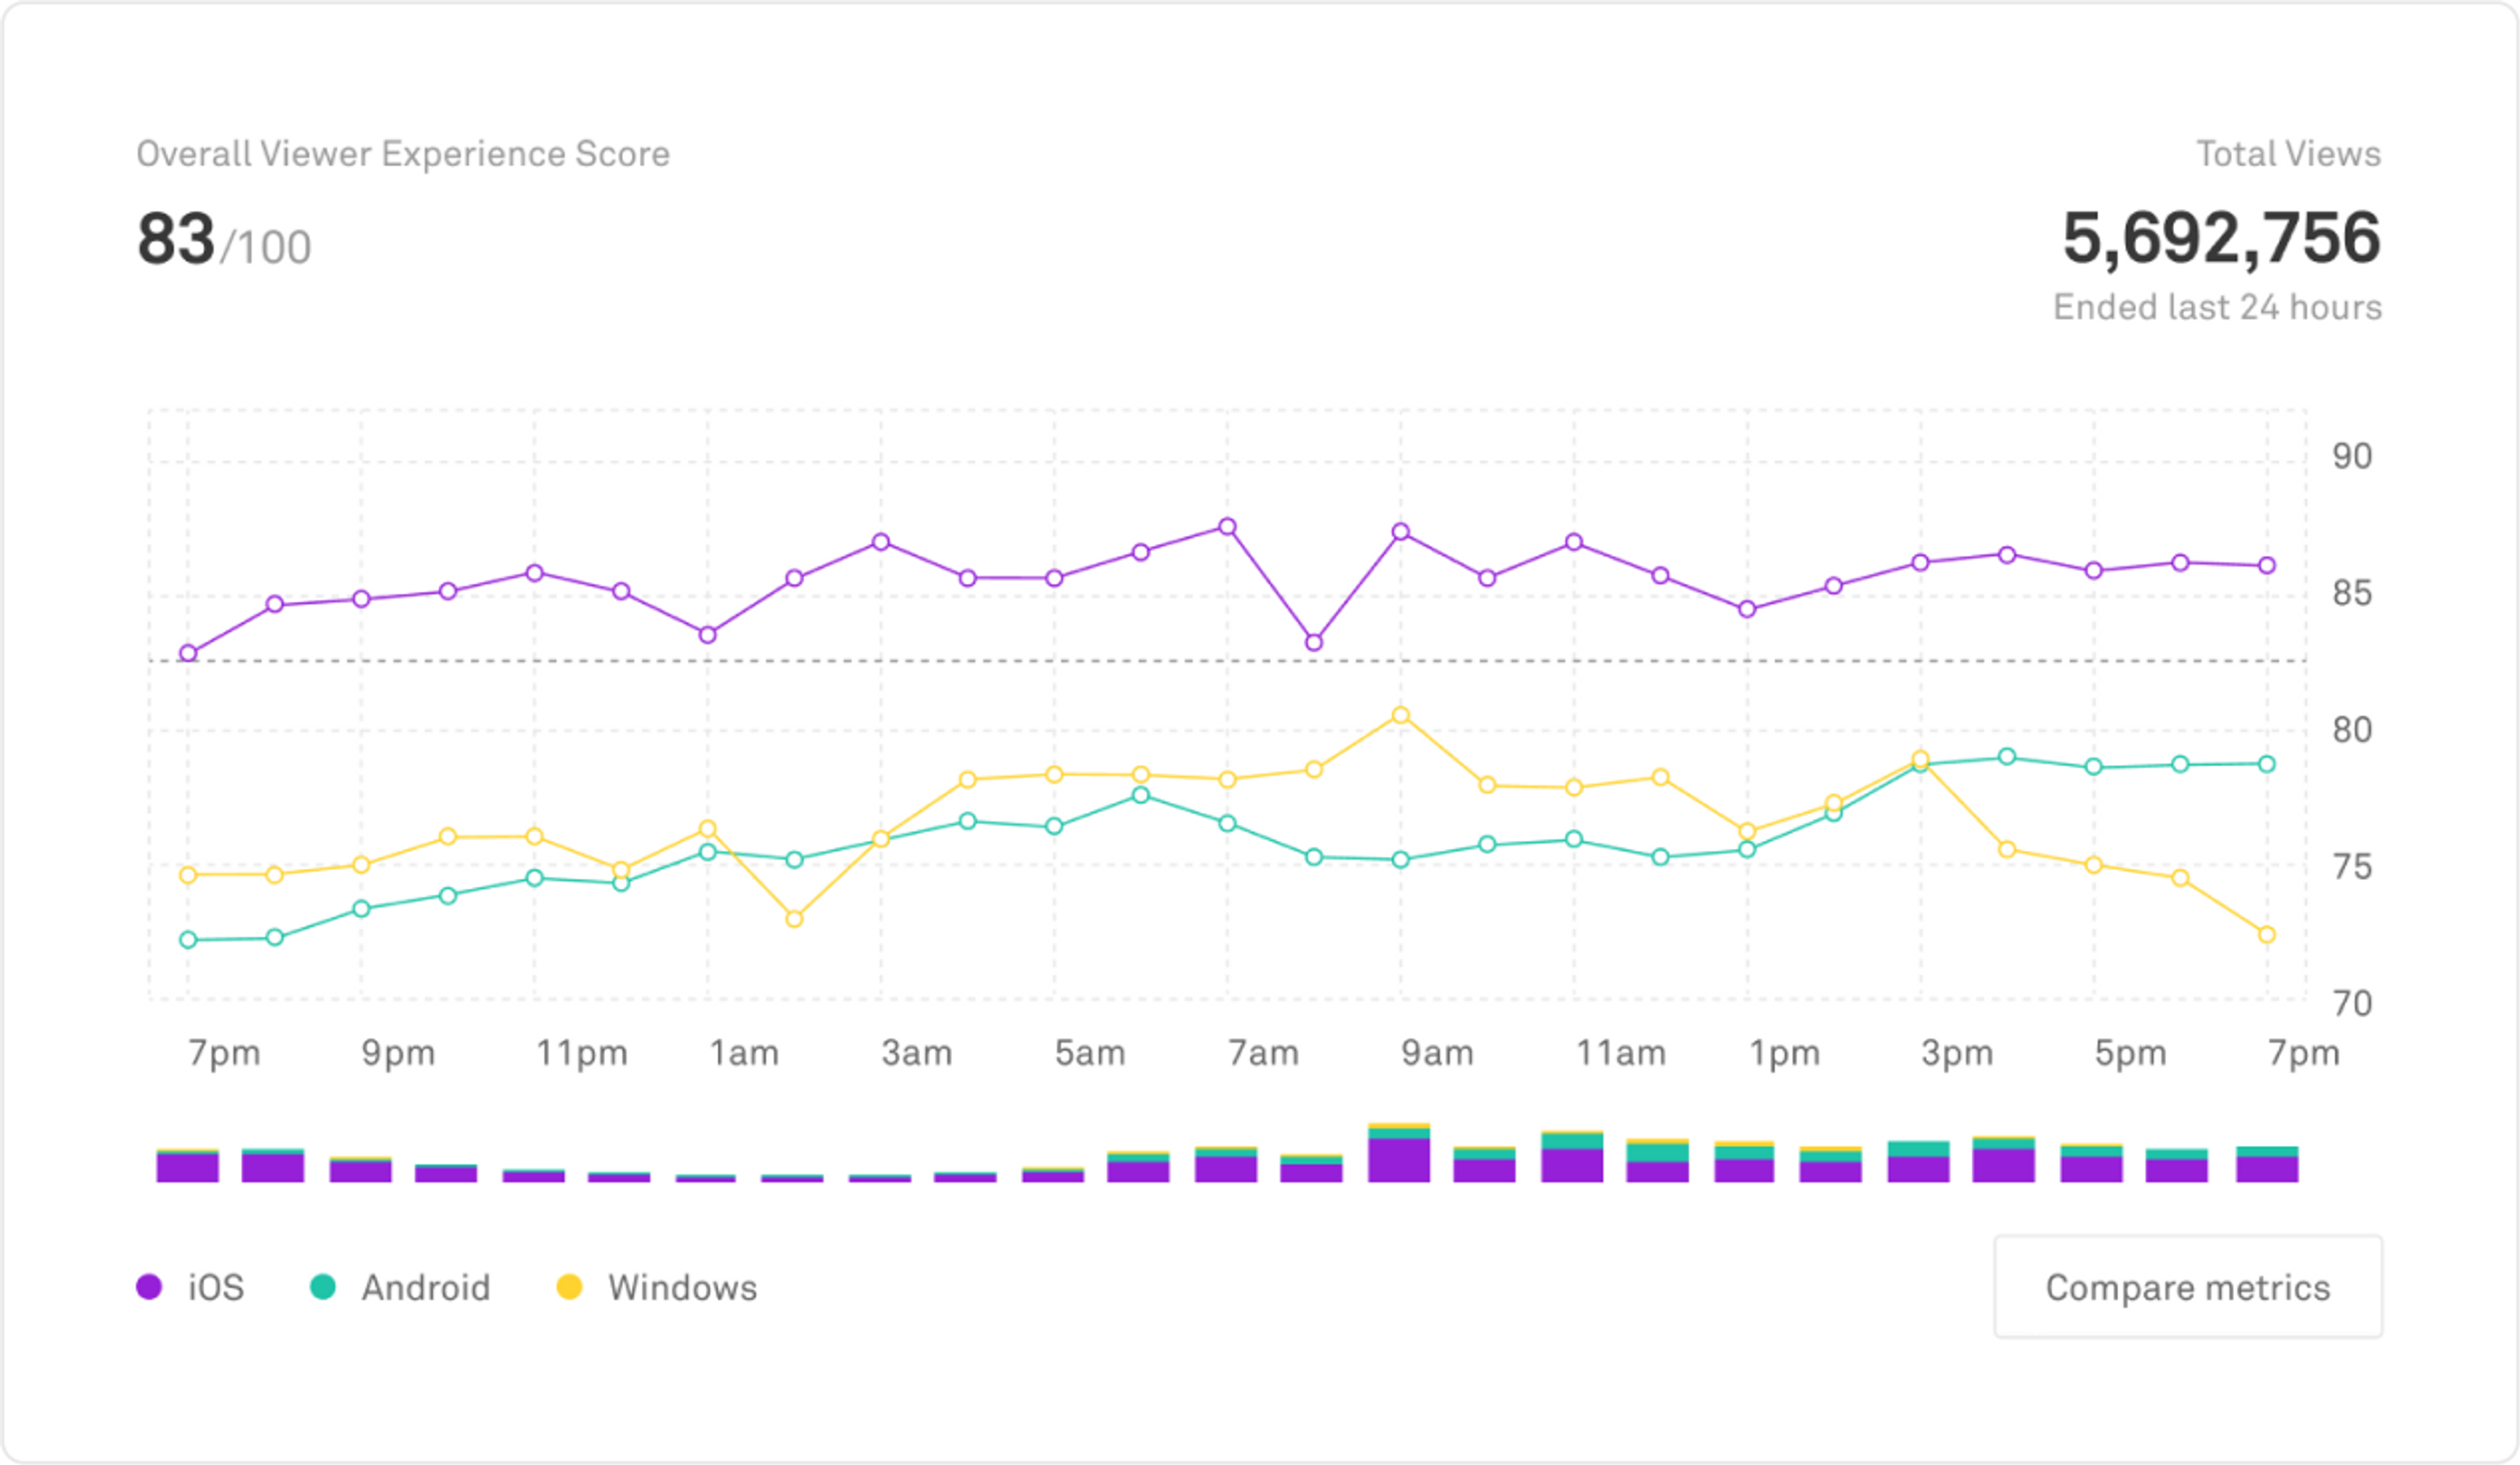 The Mux Data dashboard displaying a viewer experience score, a count of total views, and a breakdown of how many views came from iOS, Android, and Windows